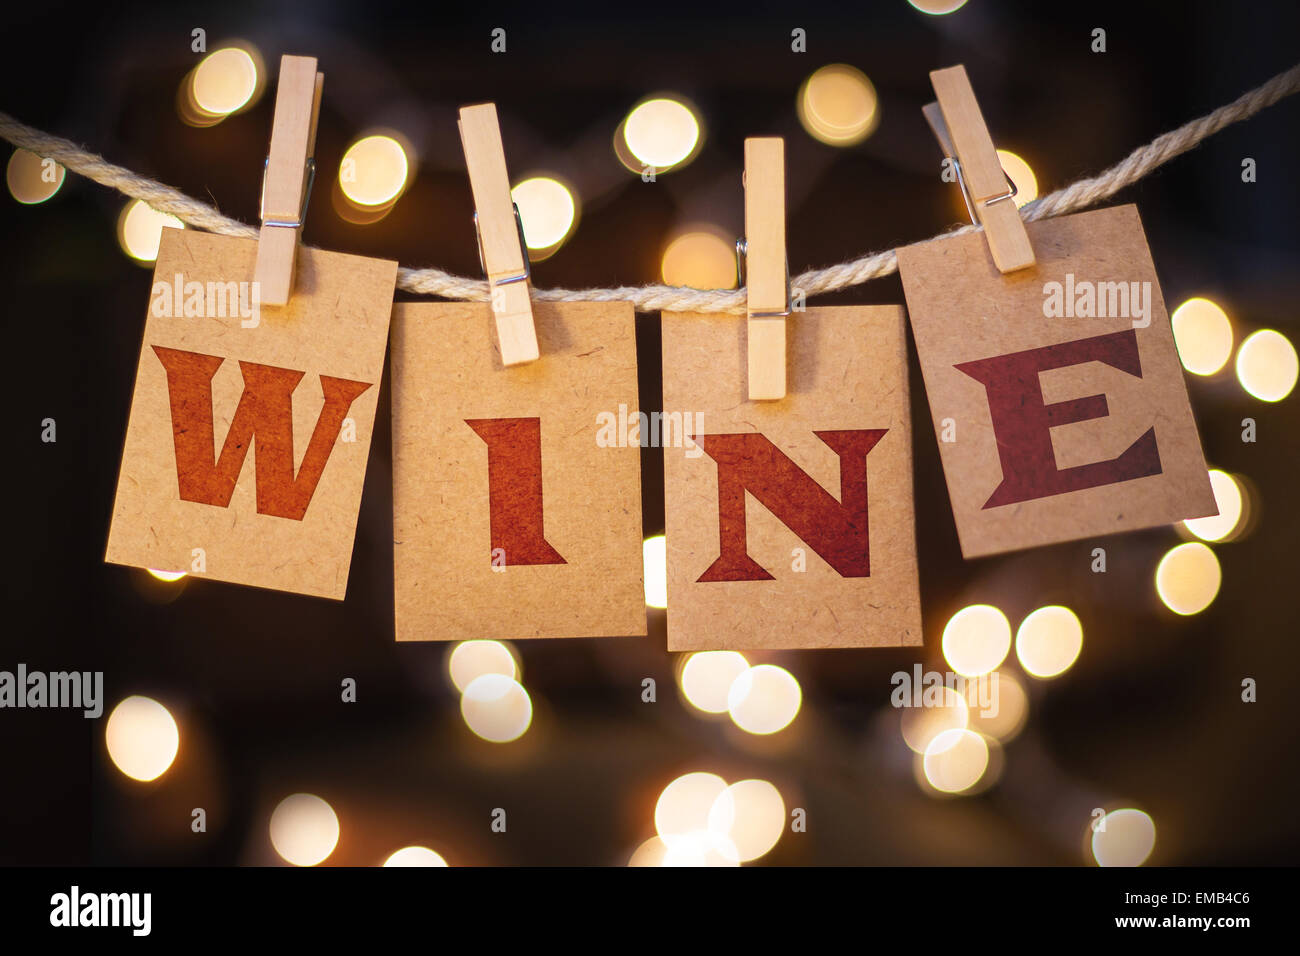 The word WINE printed on clothespin clipped cards in front of defocused glowing lights. Stock Photo